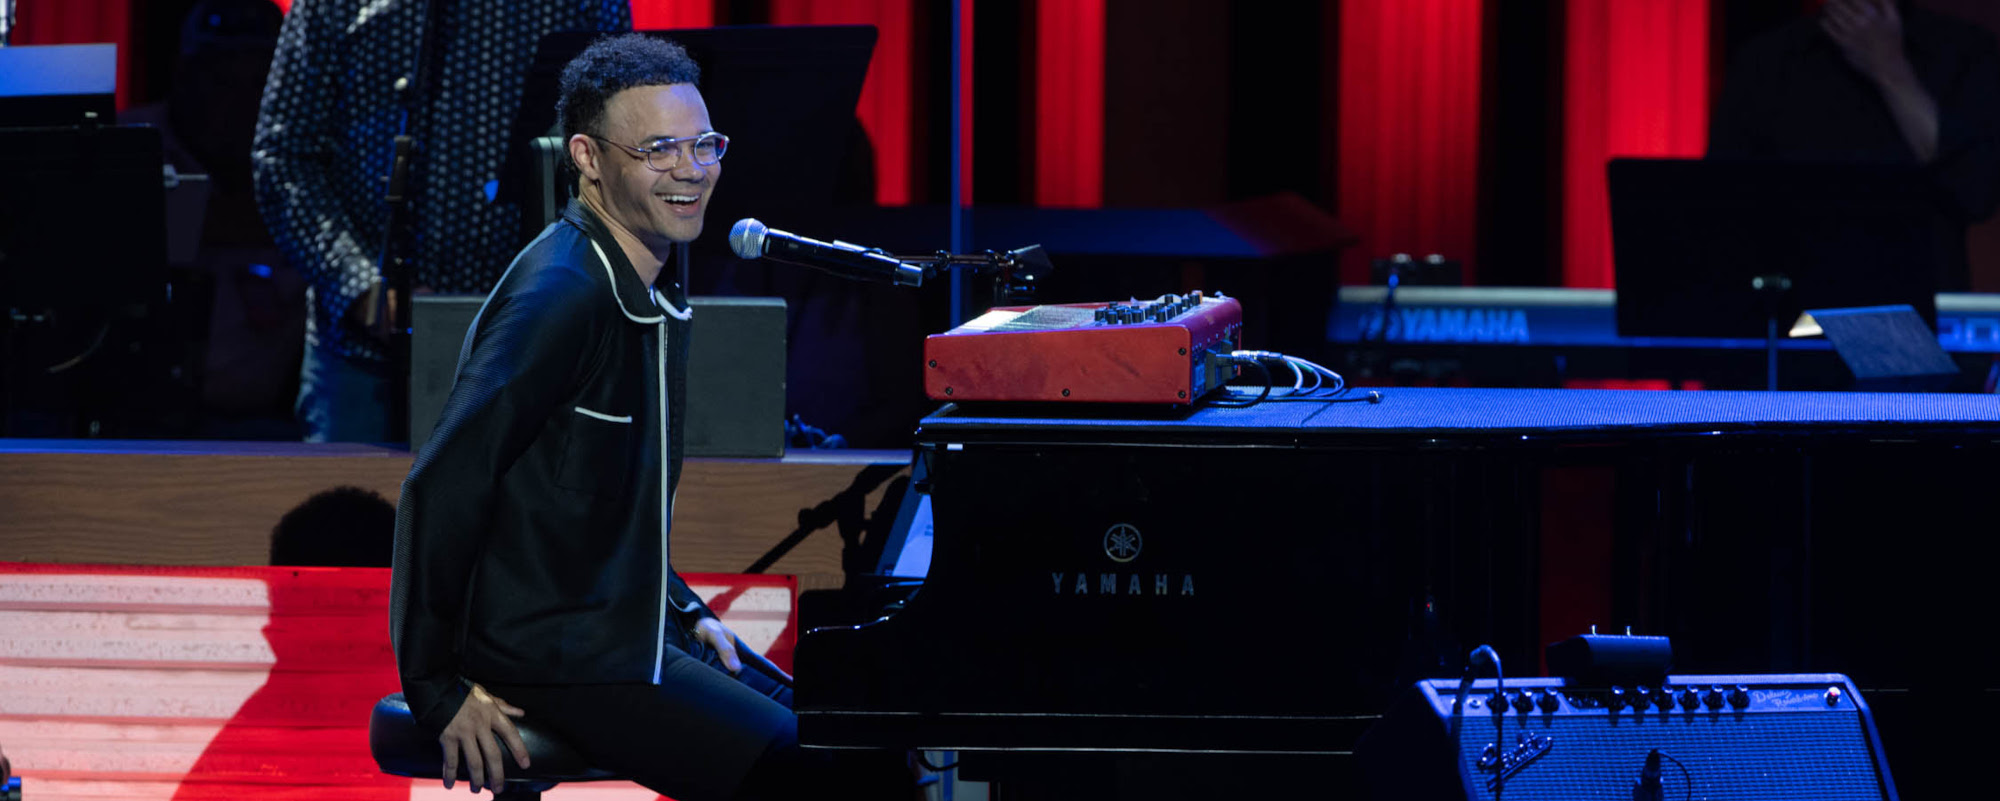 Tauren Wells Makes Opry Debut & Billy Ray Cyrus Still Has an Achy Breaky Heart